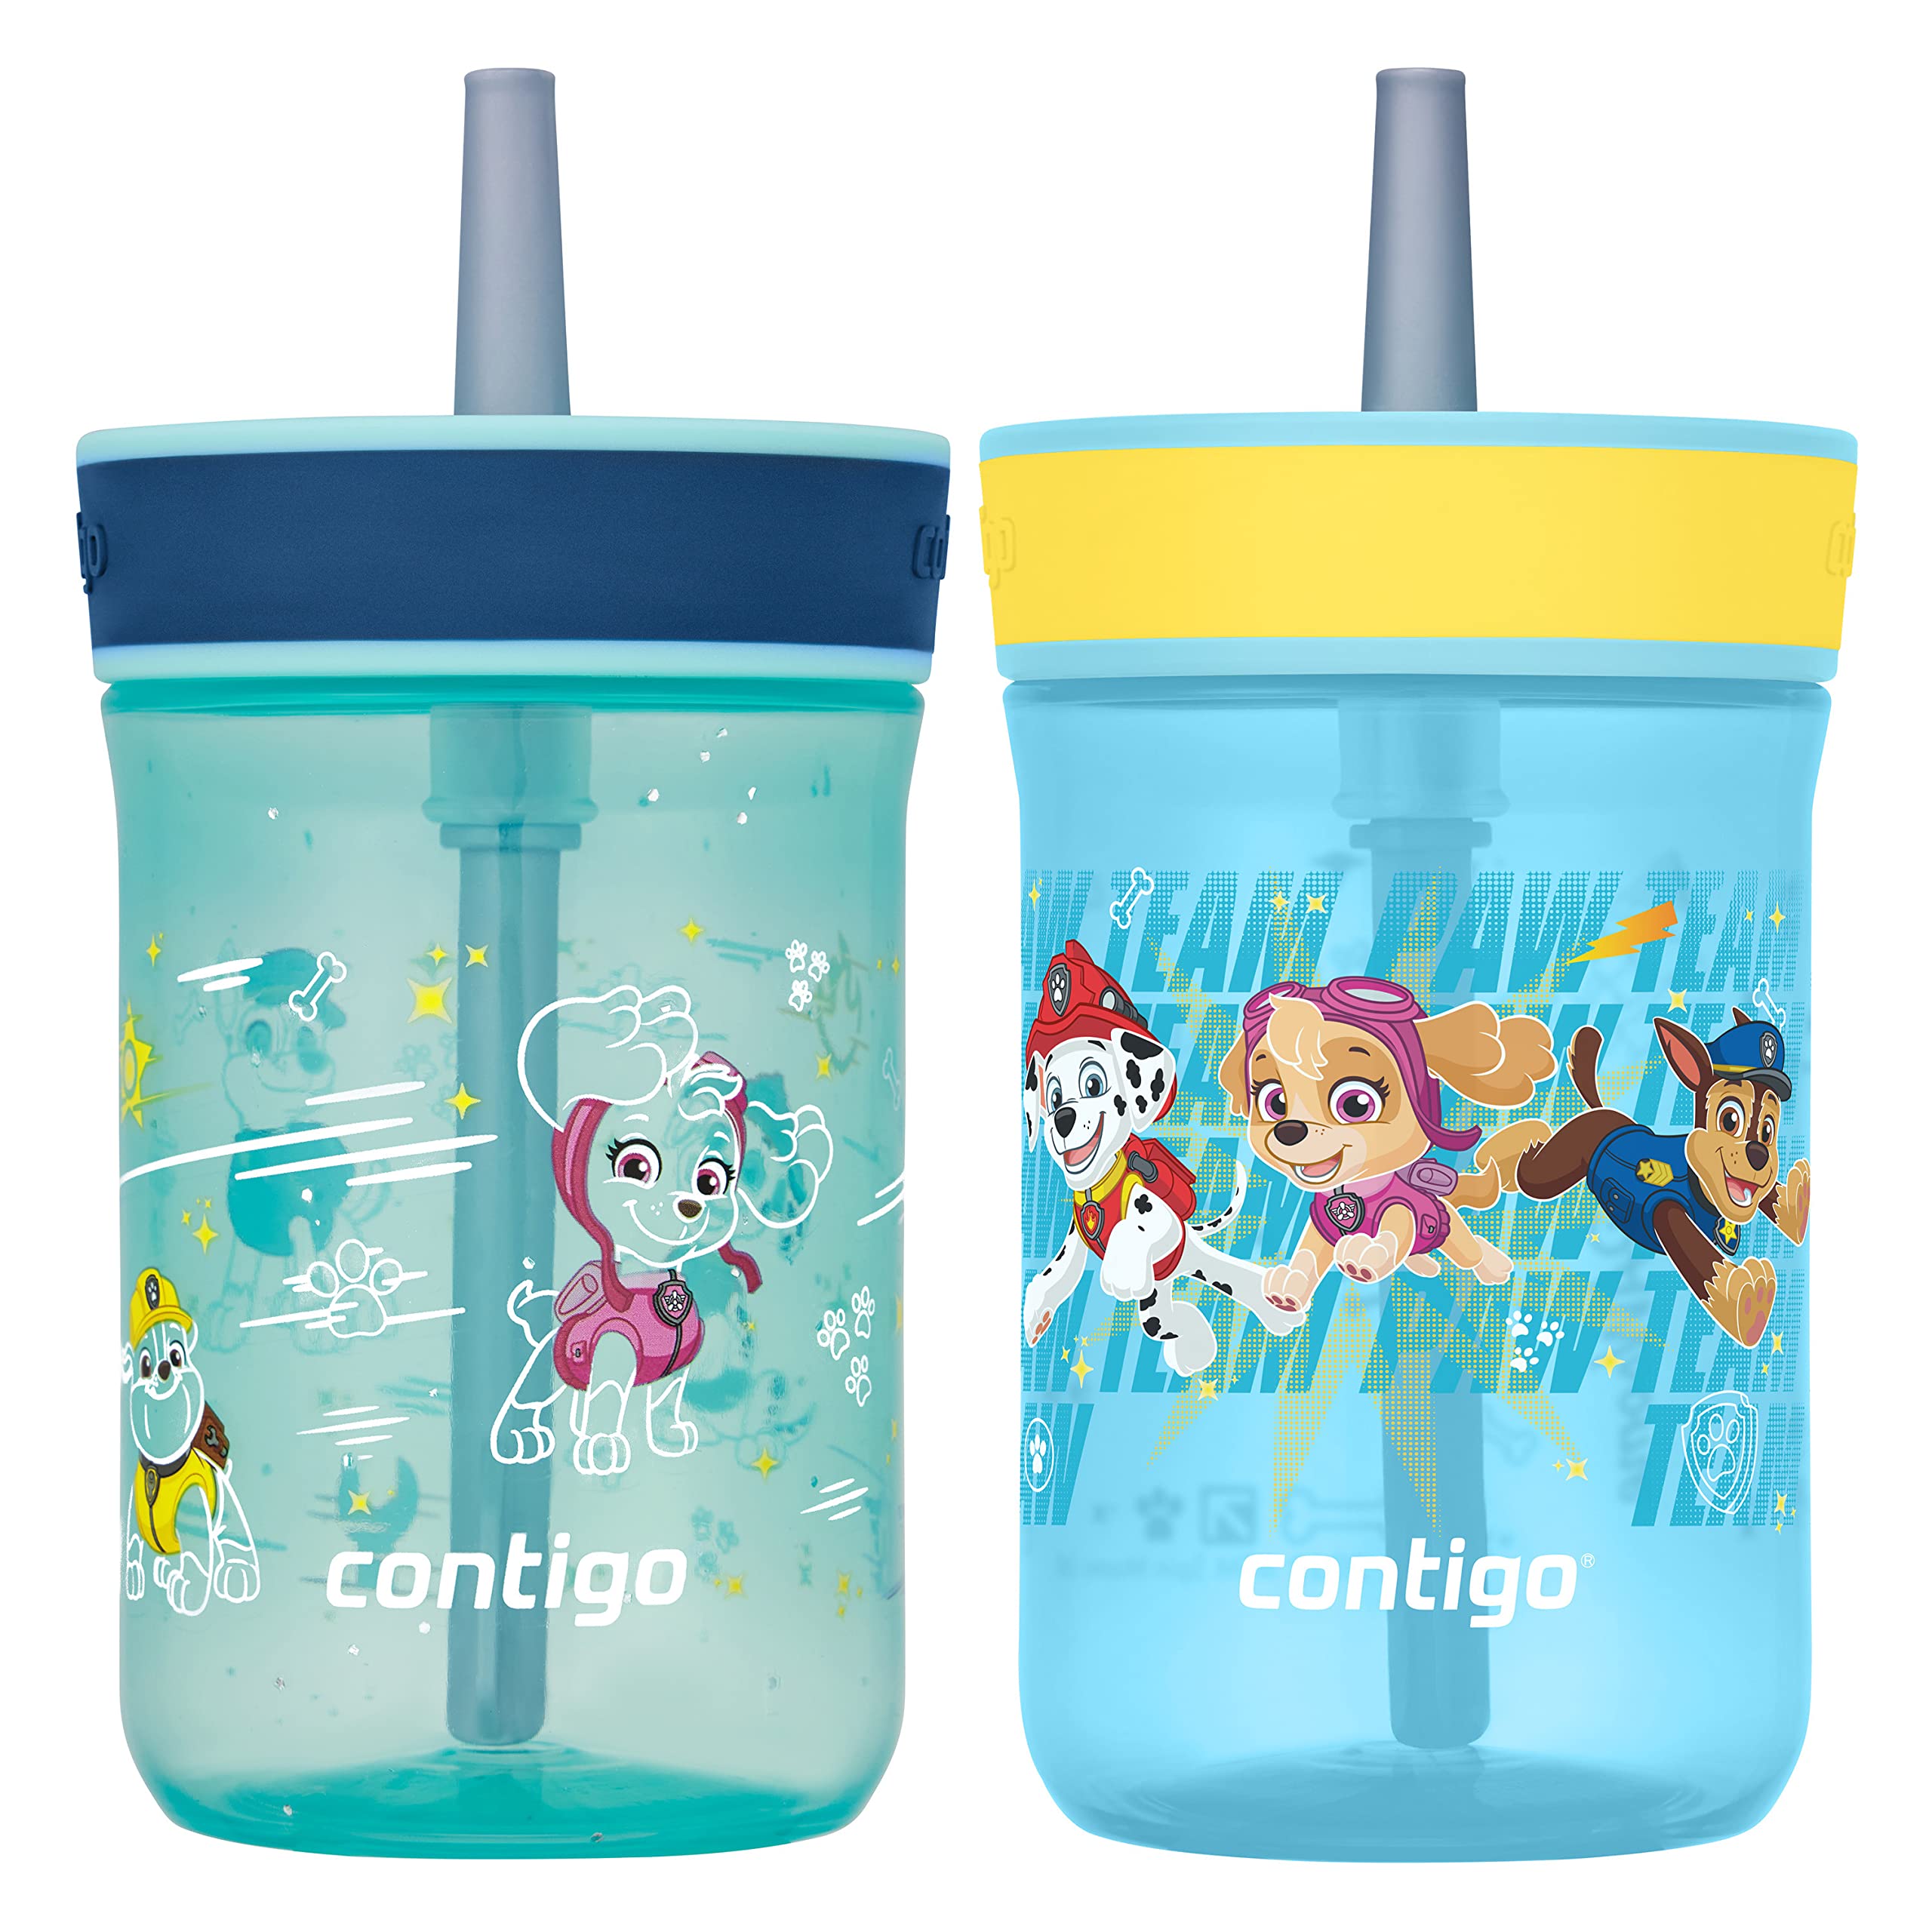 Contigo Paw Patrol Kids Plastic Water Bottles with Spill-Proof Lids (14oz, 2-Pack)